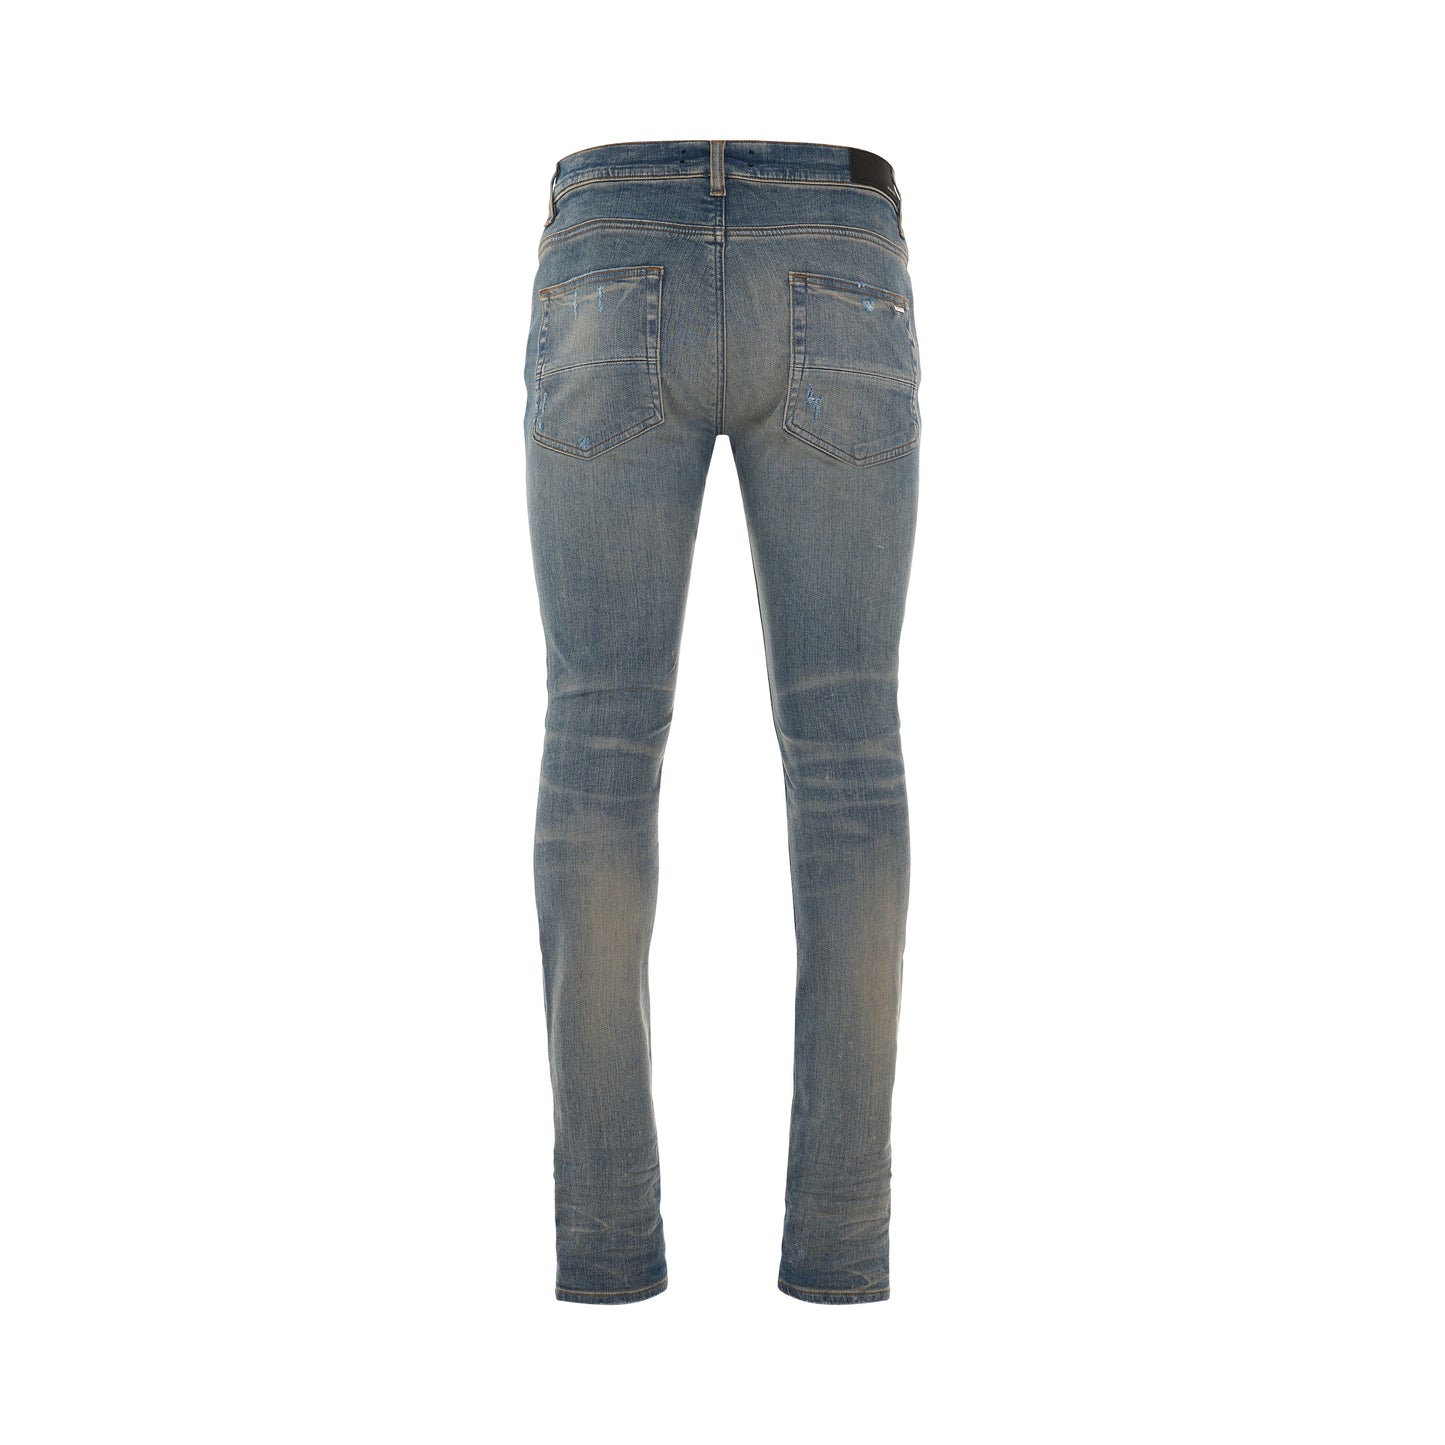 MX1 Ultra Suede Jeans in Clay Indigo